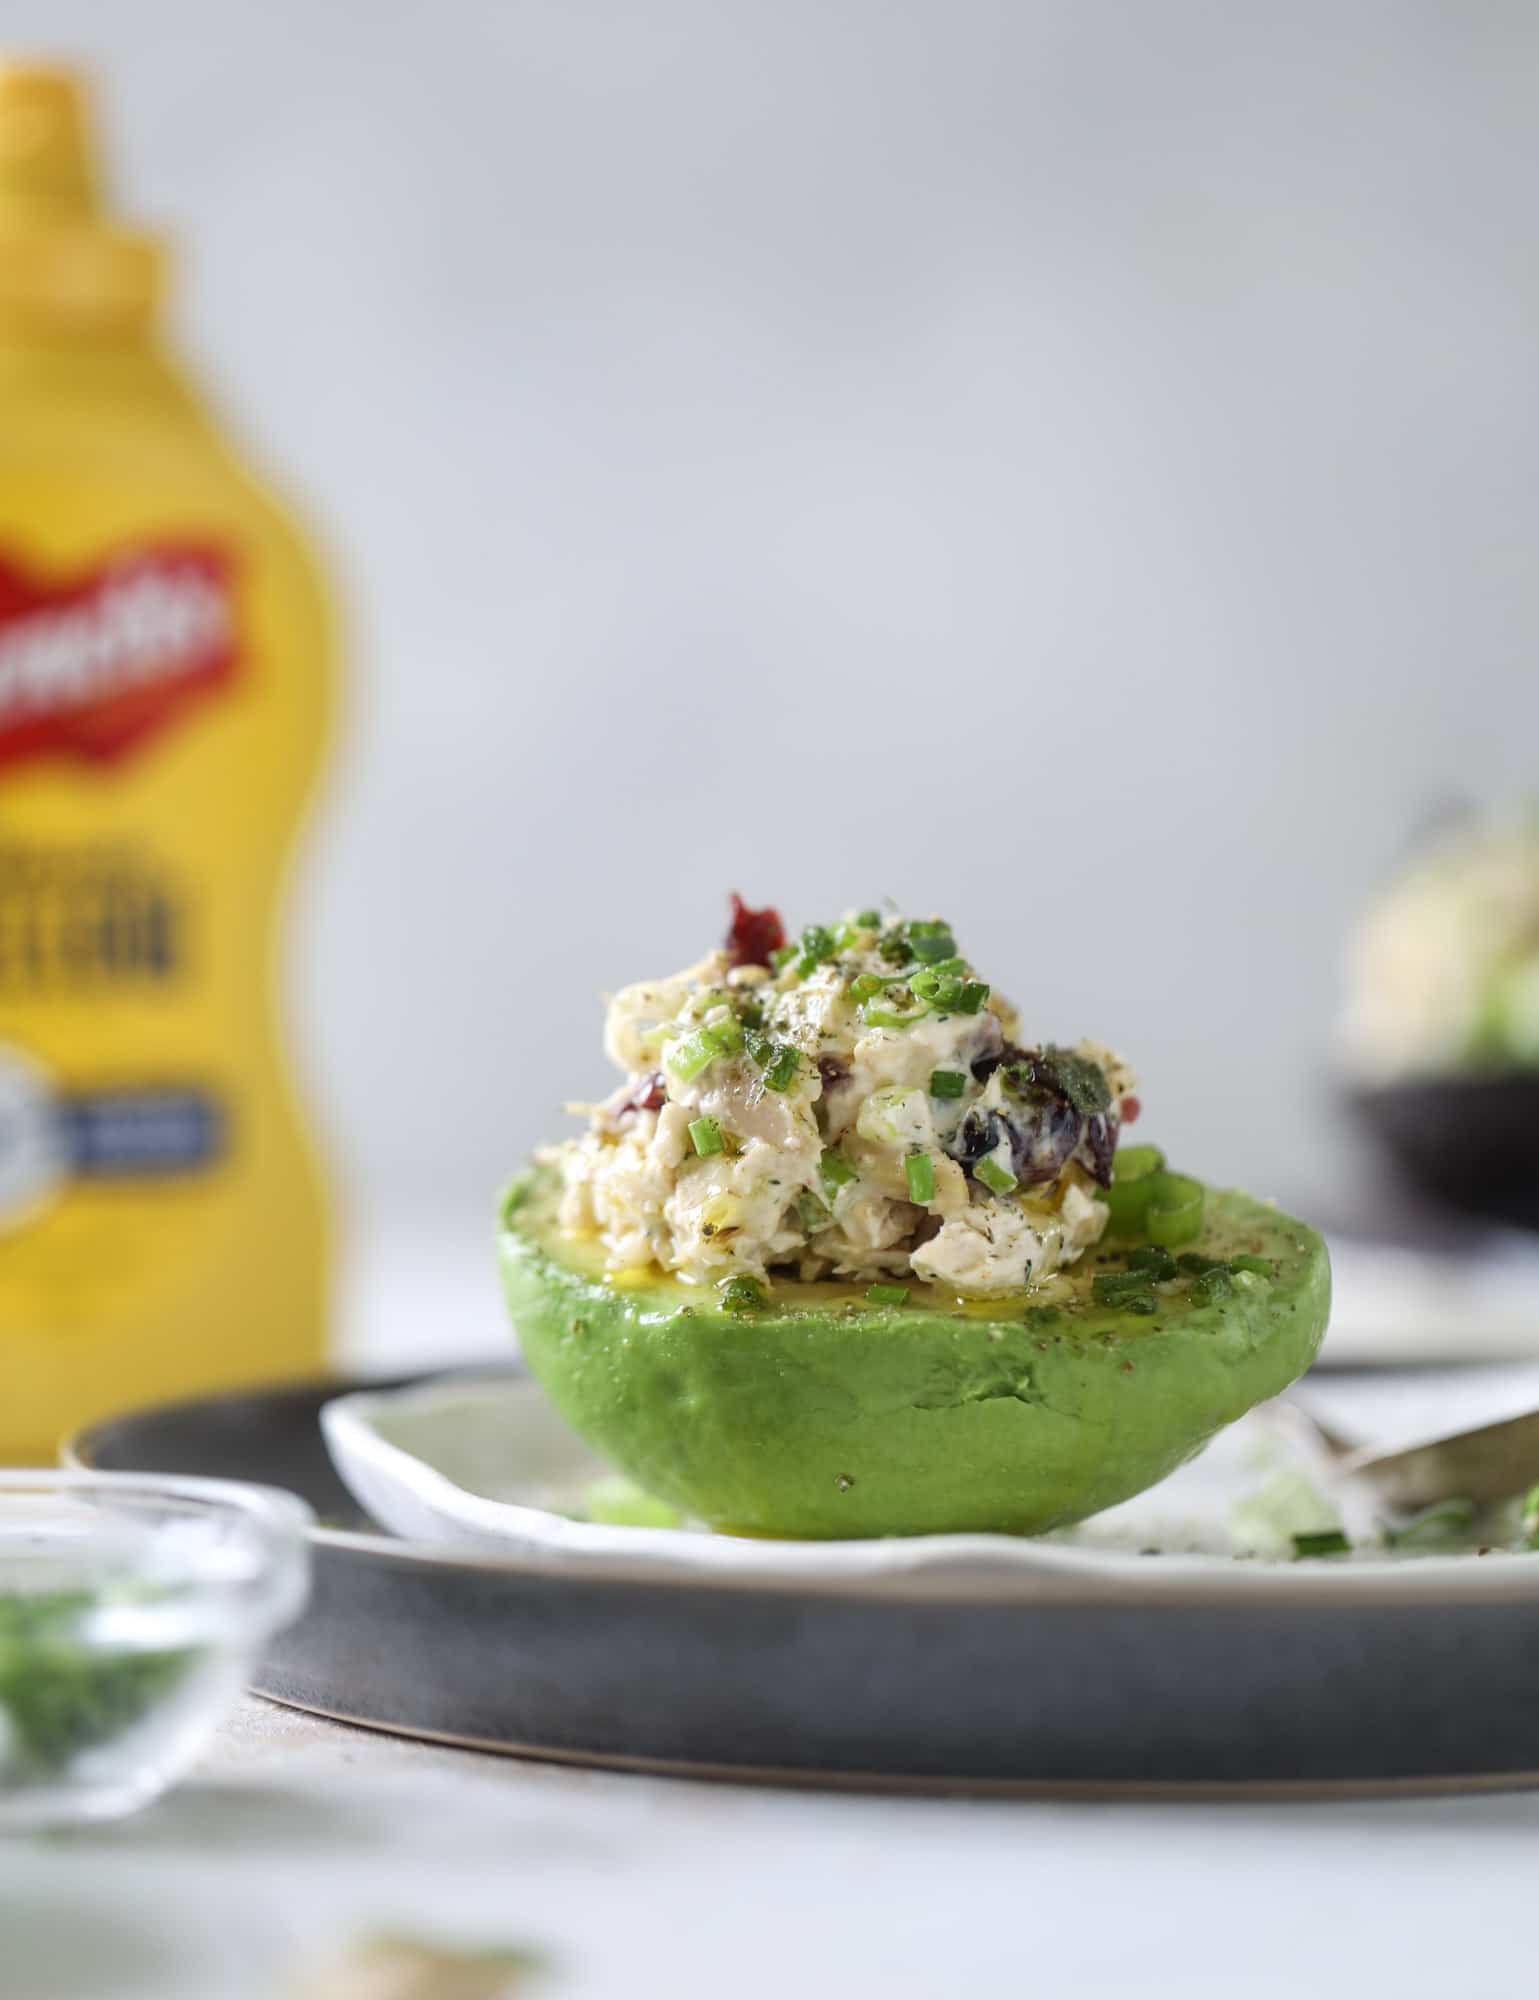 These smoky chicken salad stuffed avocados are lunchtime gold! They are super easy to throw together, satisfying and pretty darn great for you. Made with greek yogurt, some tangy mustard and dried cherries for sweetness, they are delish! I howsweeteats.com #chicken #salad #stuffed #avocados #greekyogurt